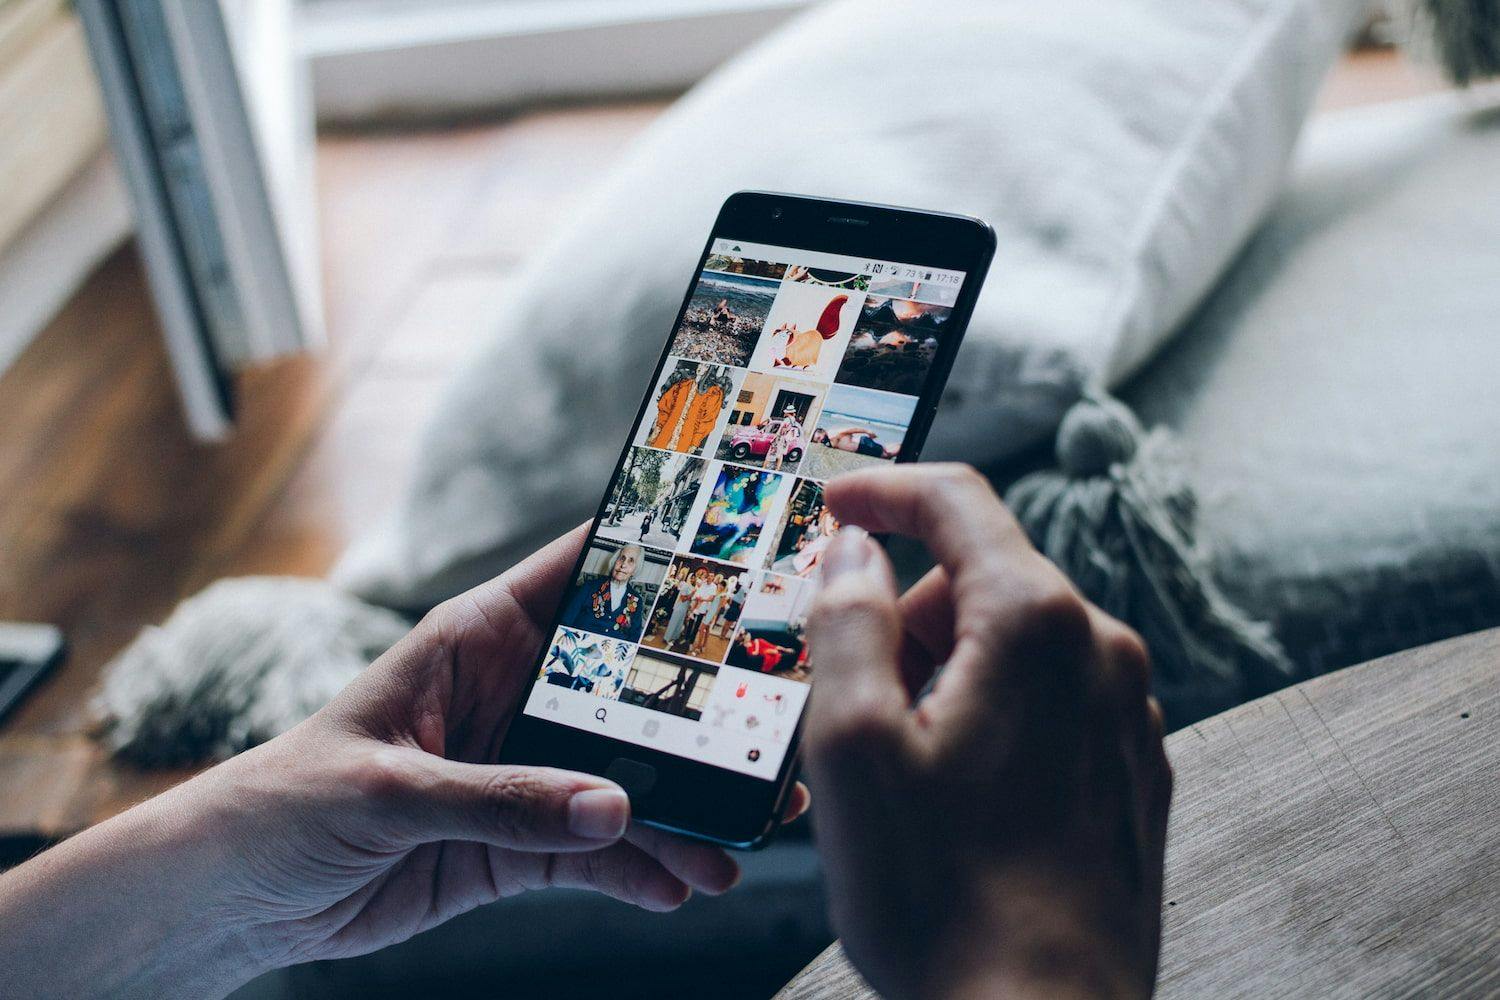 Instagram Bans Self-harm Content: Two Sides to the Story